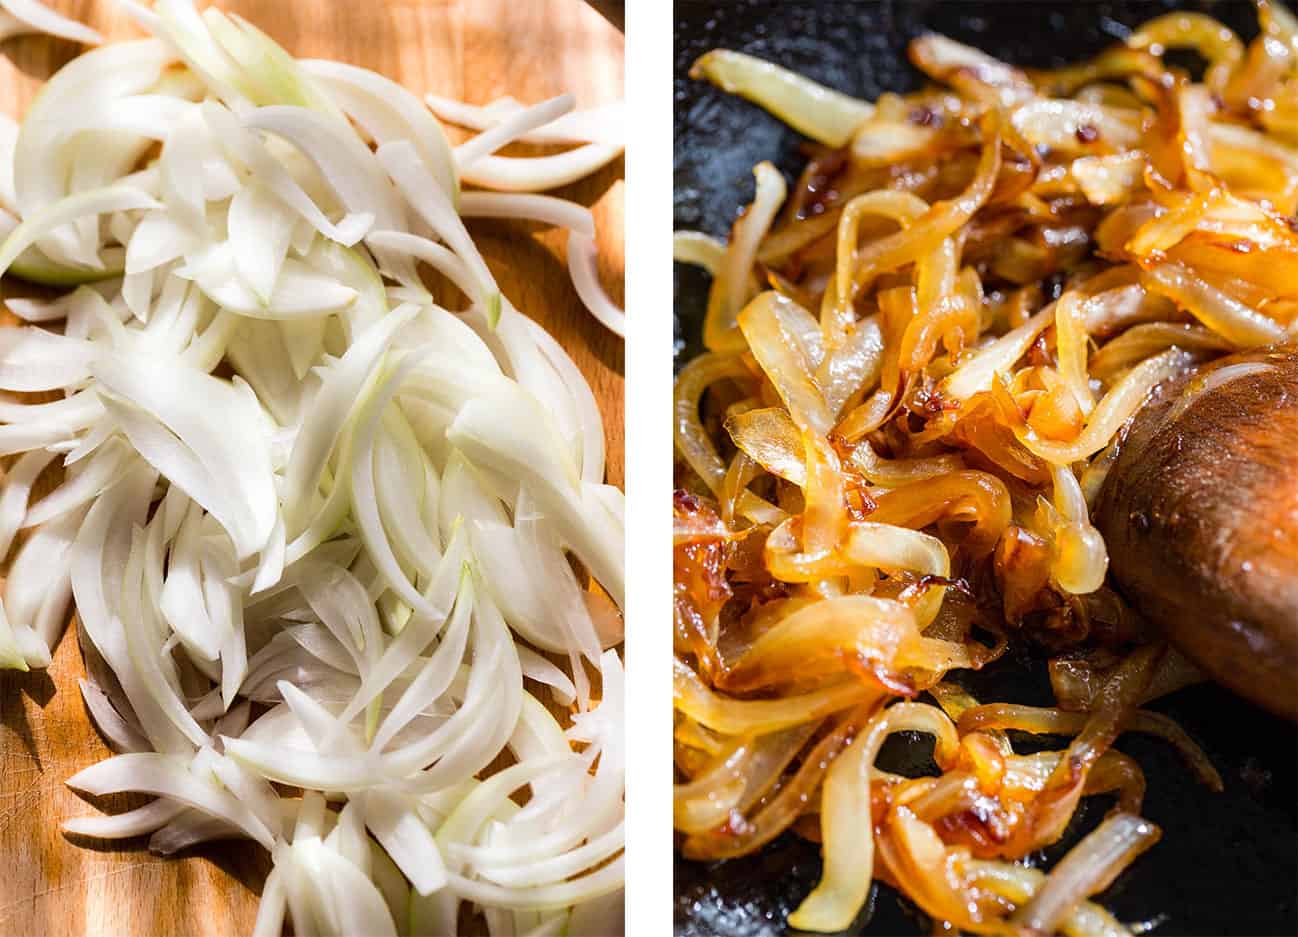 Left: raw, sliced white onion. Right: caramelizing onions in a cast-iron pan.